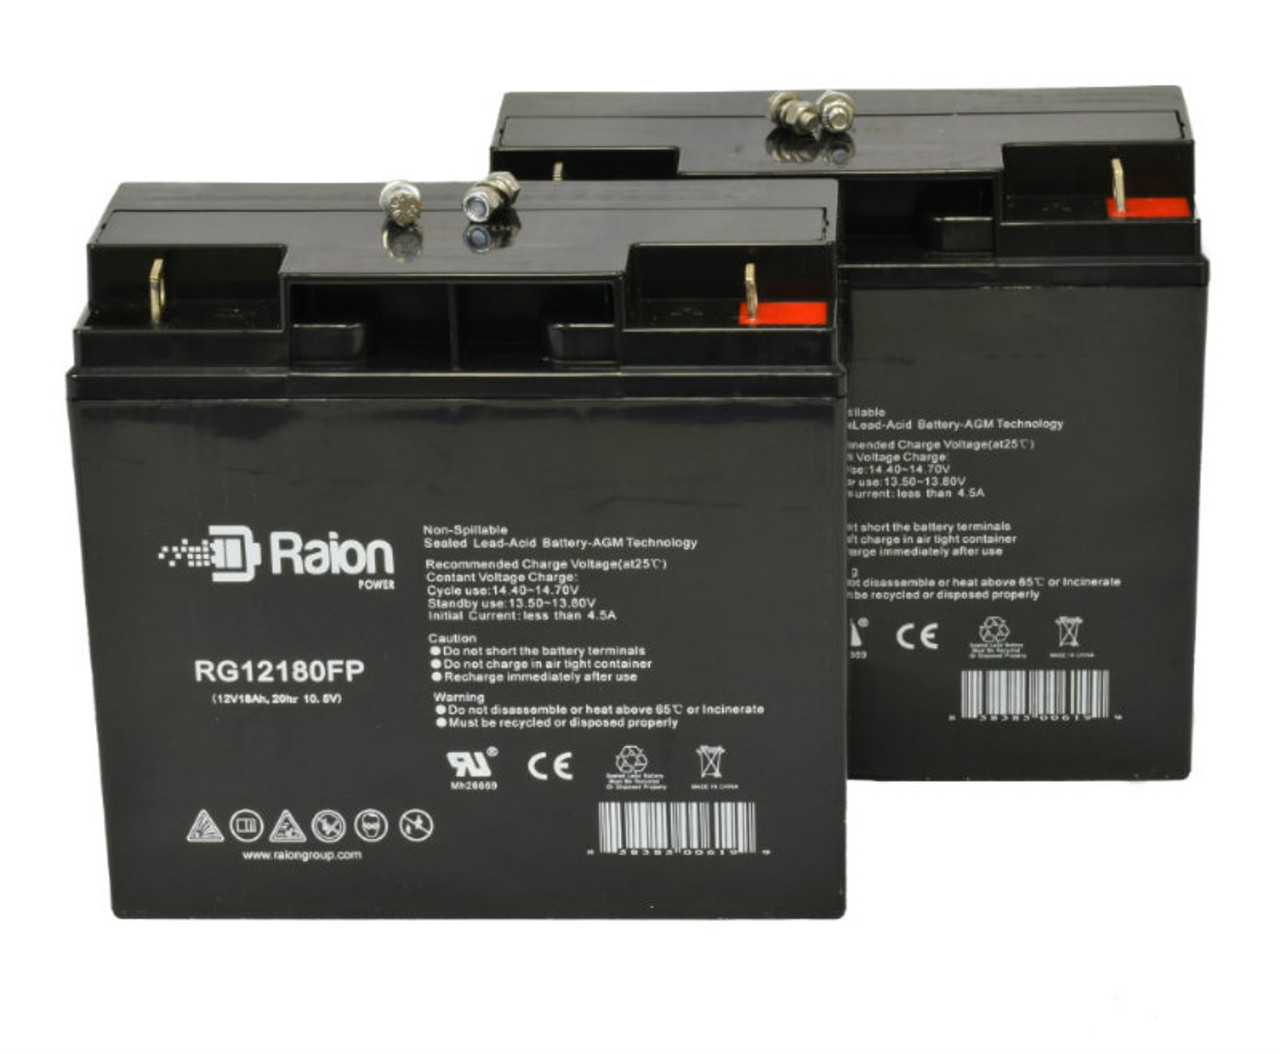 Raion Power Replacement RG12180FP 12V 18Ah Emergency Light Battery for Teledyne 2IL12S15 - 2 Pack